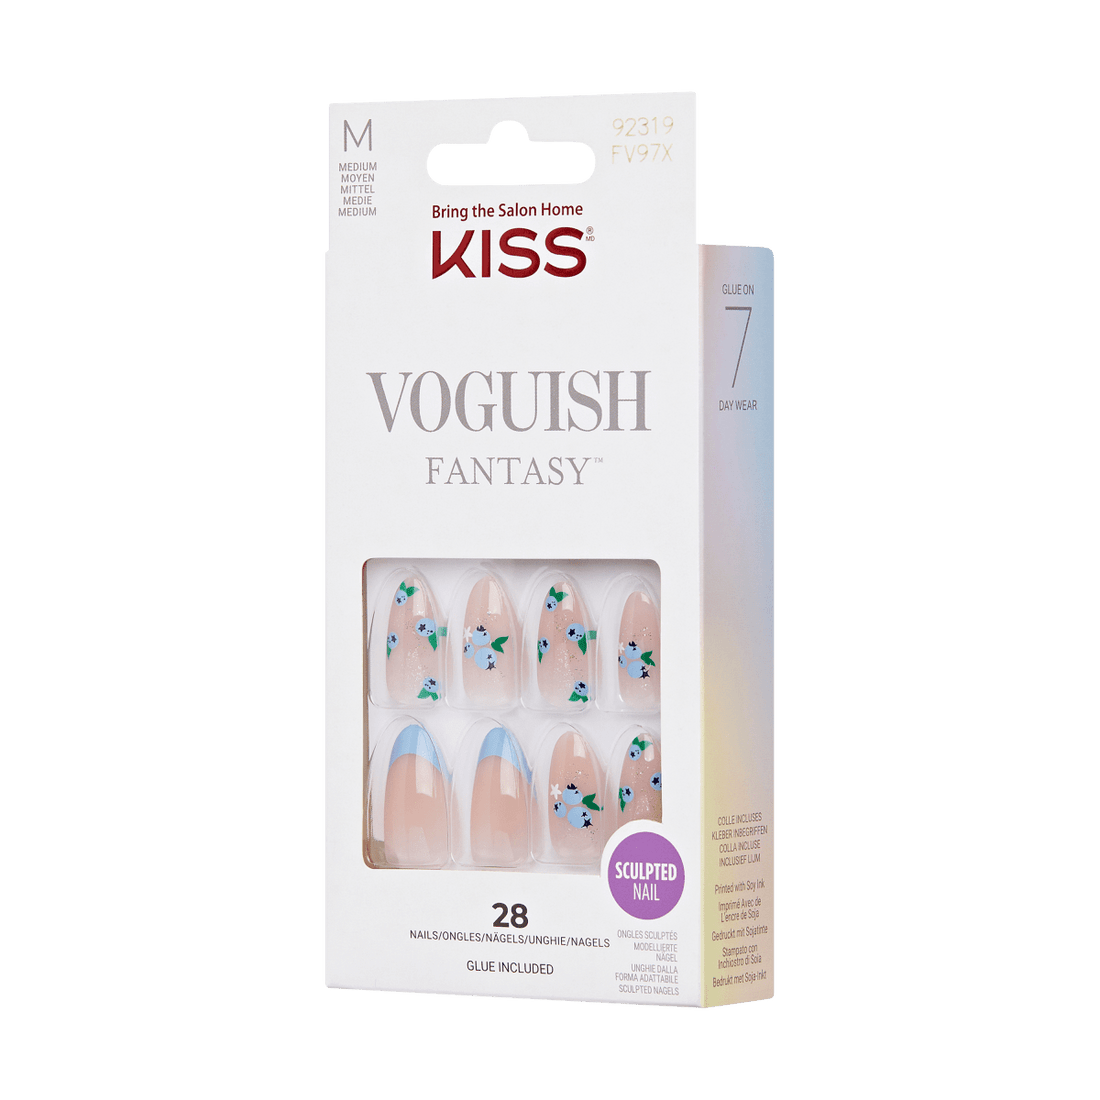 KISS Voguish Fantasy, Press-On Nails, Be You, Blue, Med Almond, 28ct